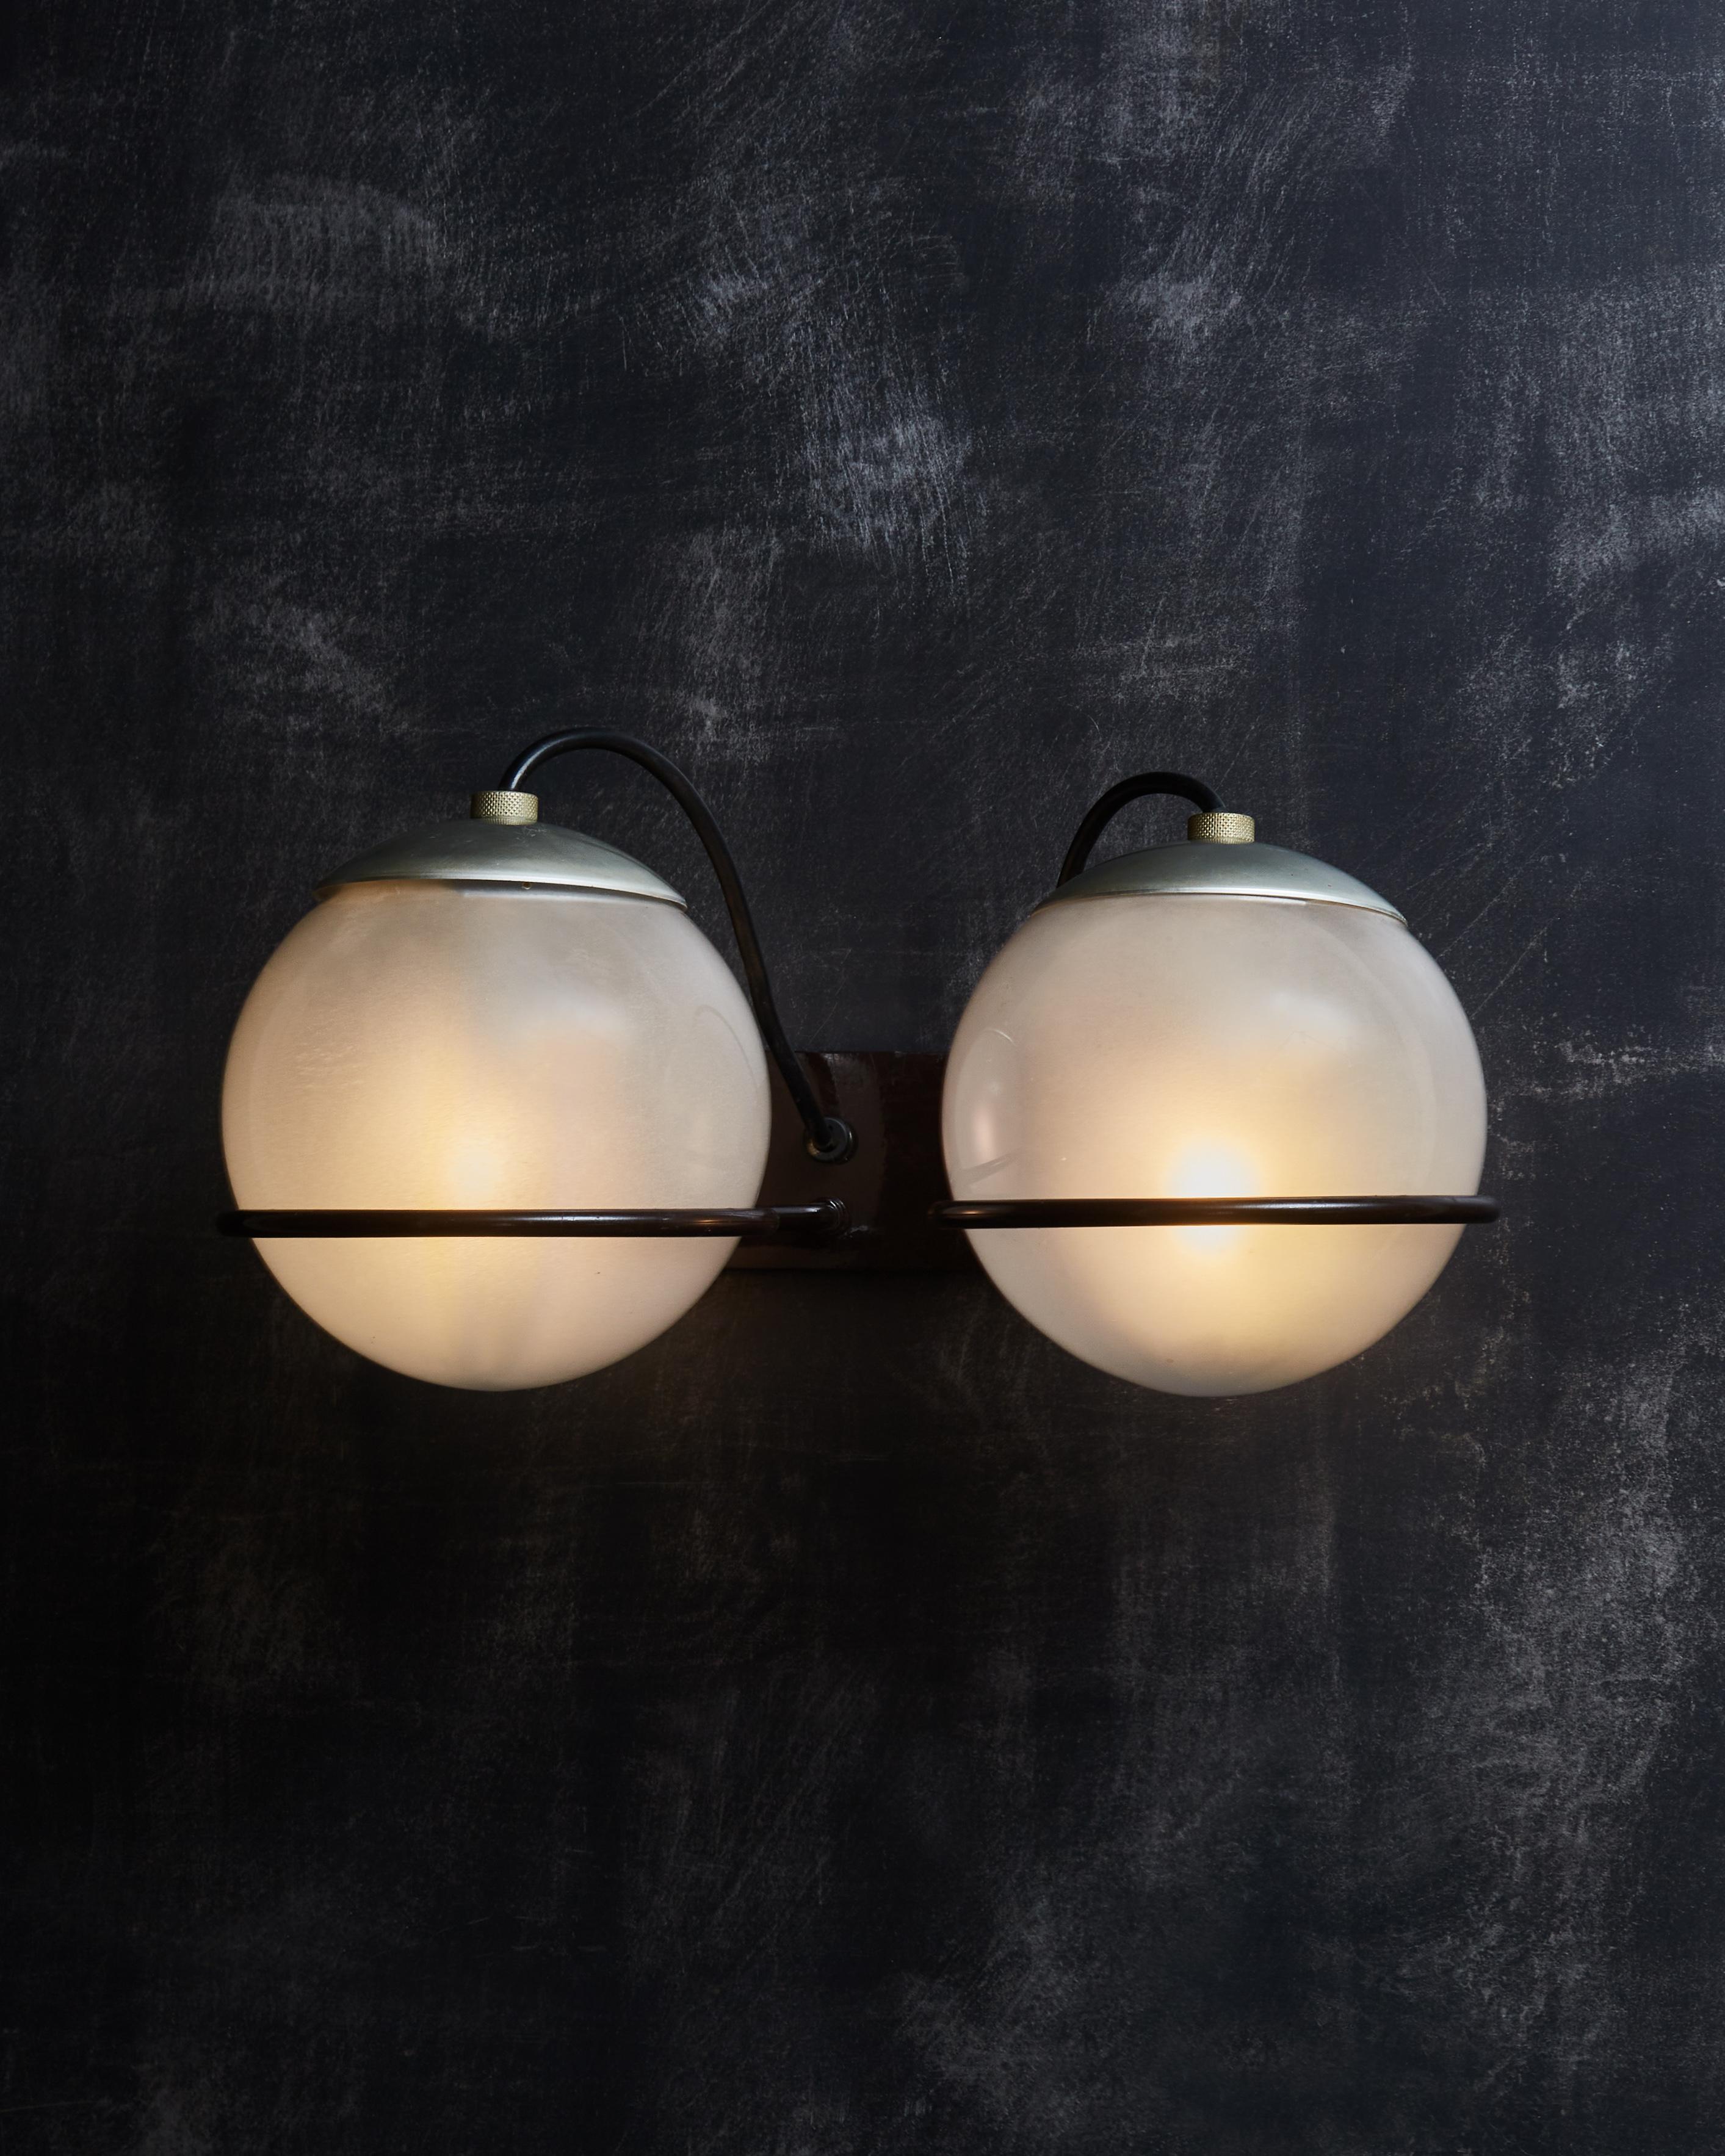 Set of four vintage model 237/2 wall sconces by Gino Sarfatti for Arteluce.
Two frosted glass globes resting on the black lacquered iron bar support rings.
 